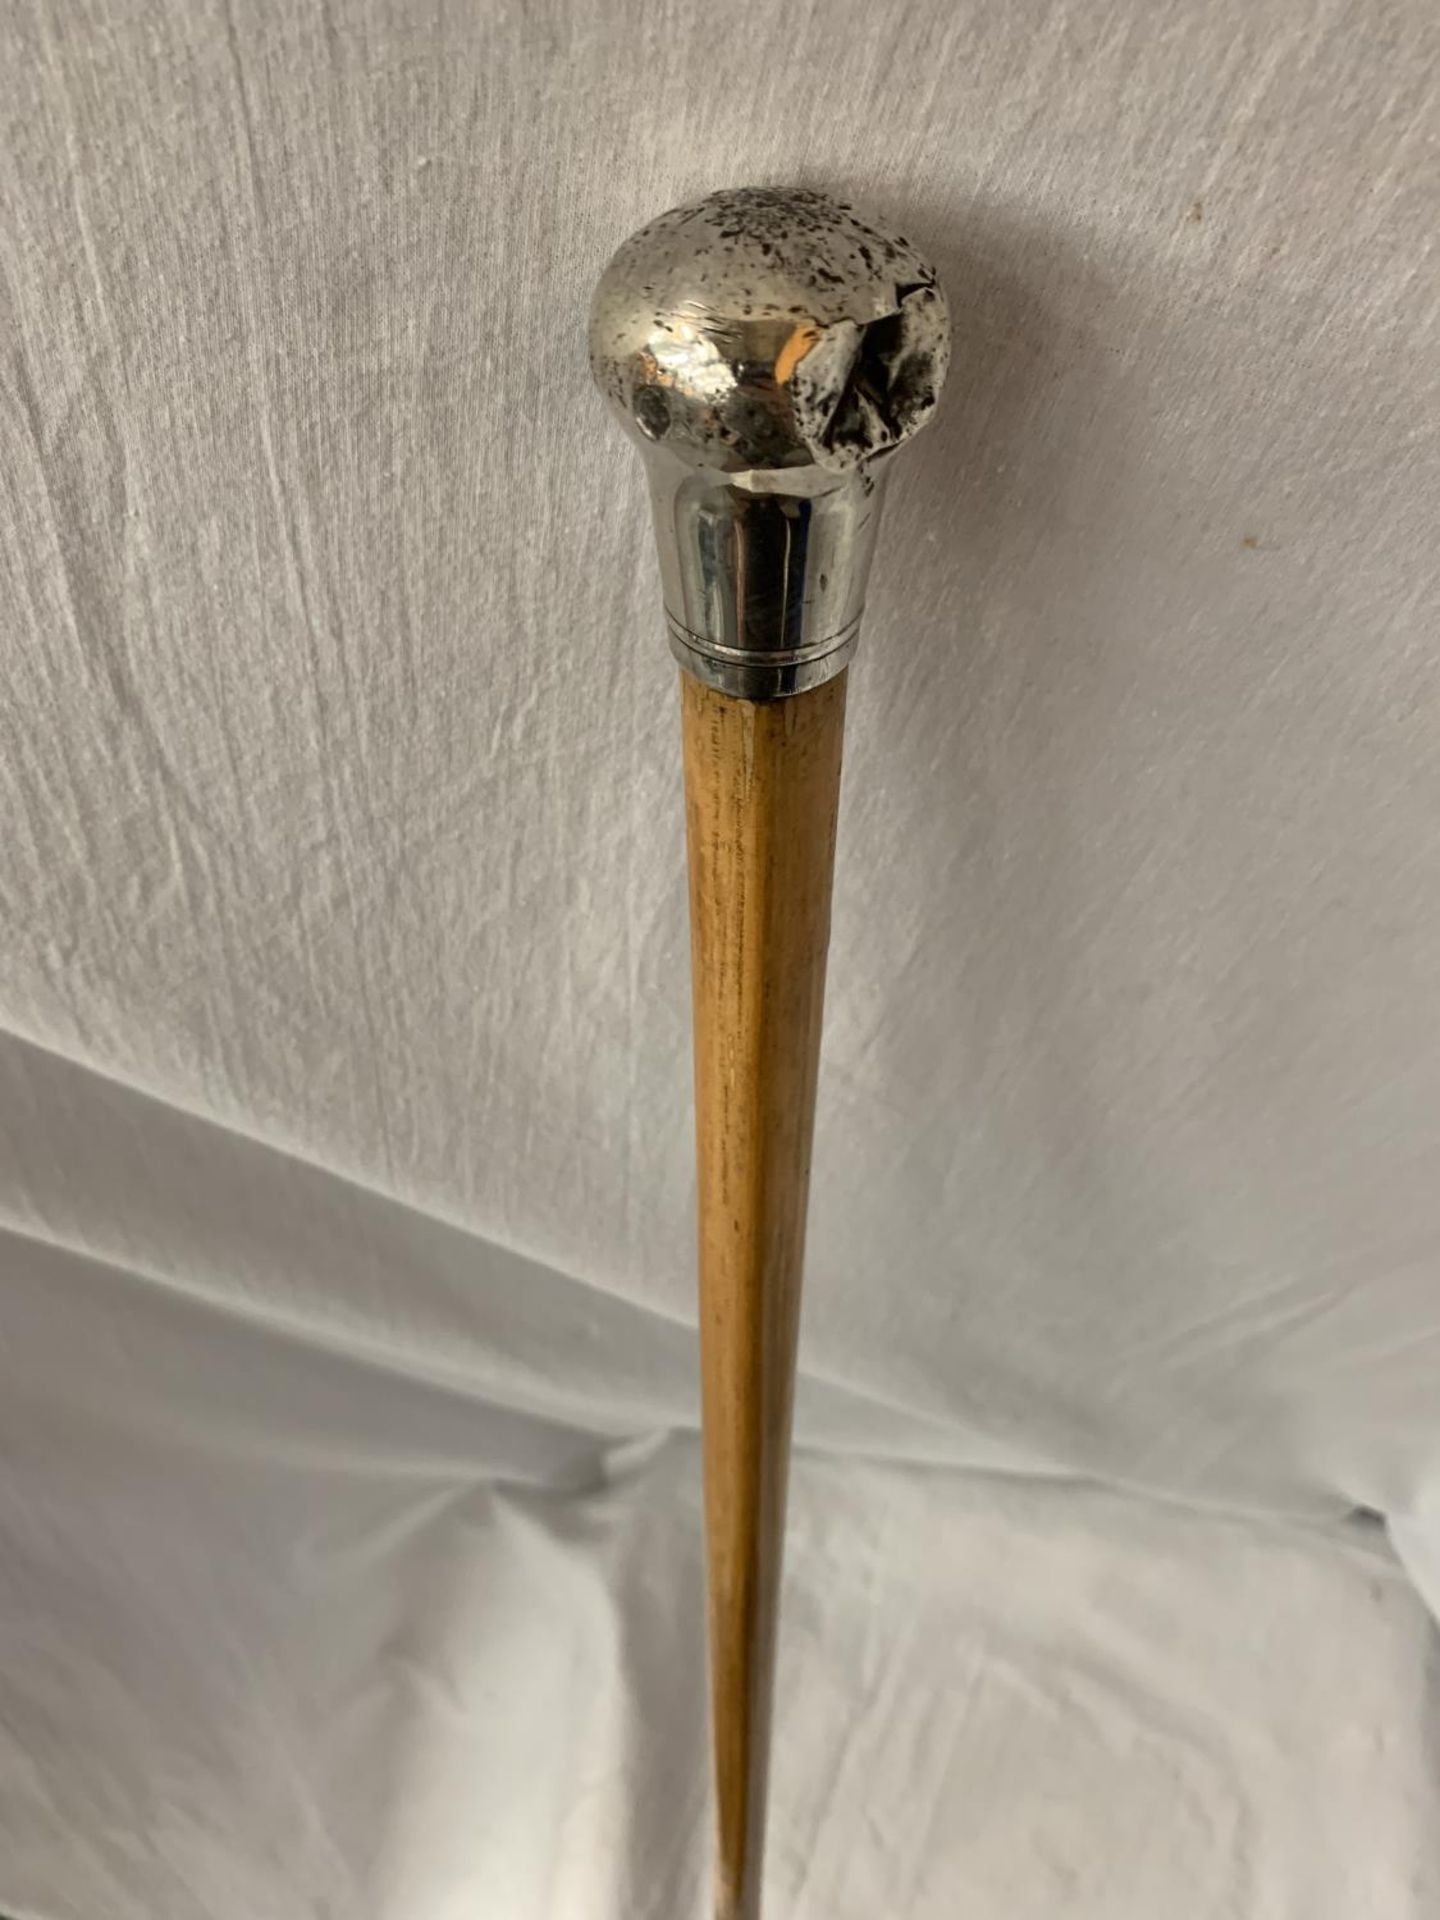 A VINTAGE SILVER TOPPED CANE - Image 2 of 3